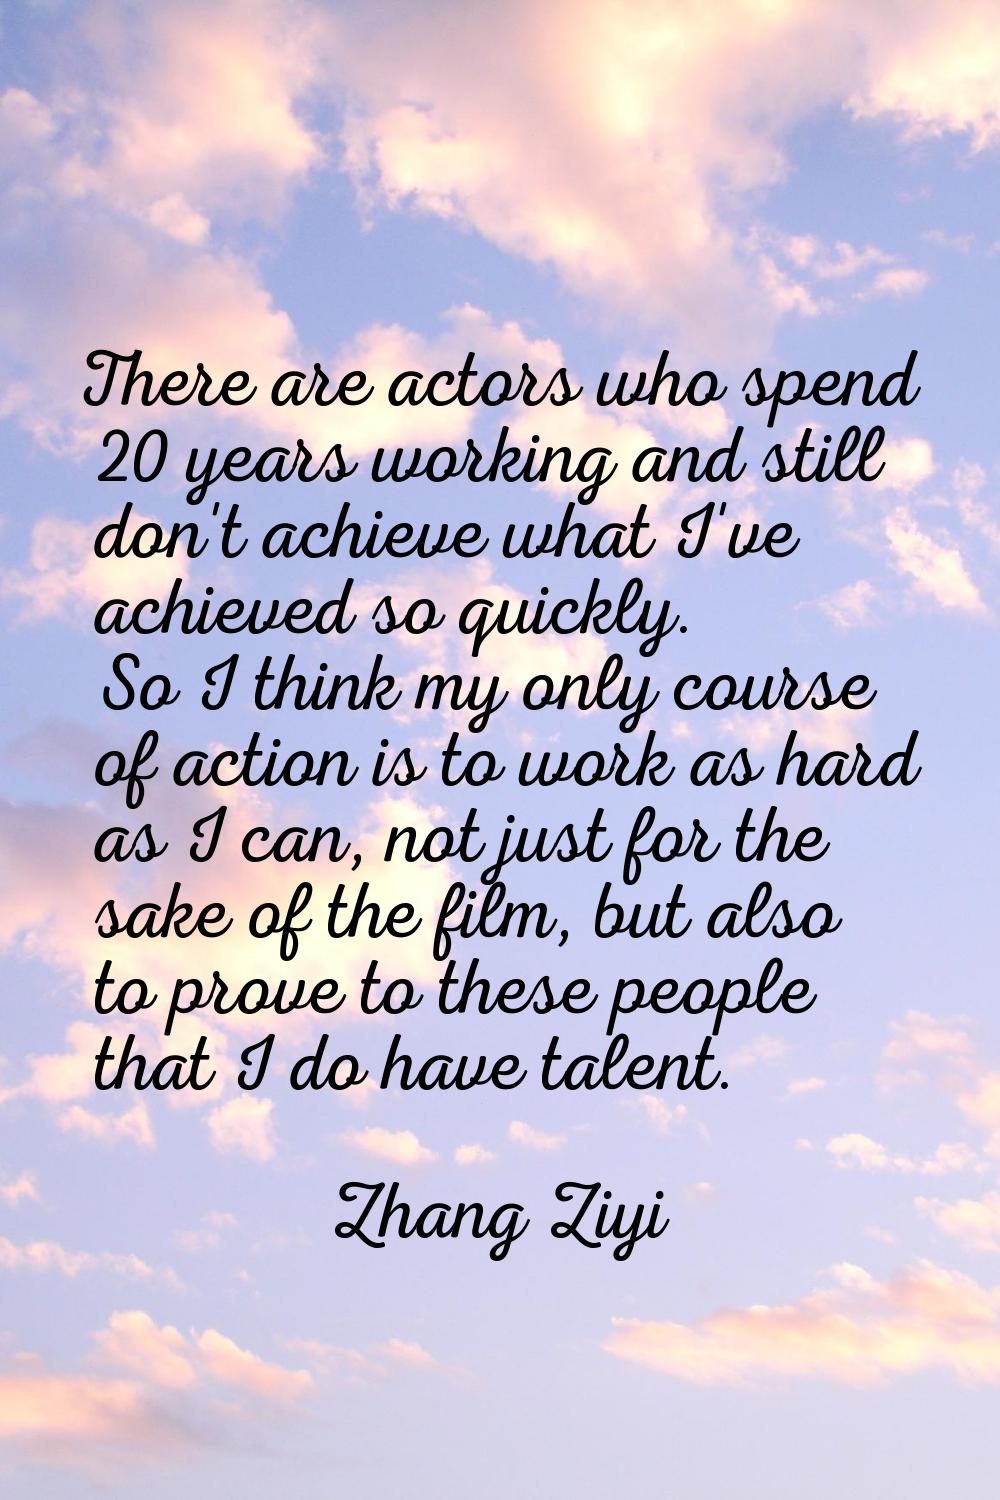 There are actors who spend 20 years working and still don't achieve what I've achieved so quickly. 